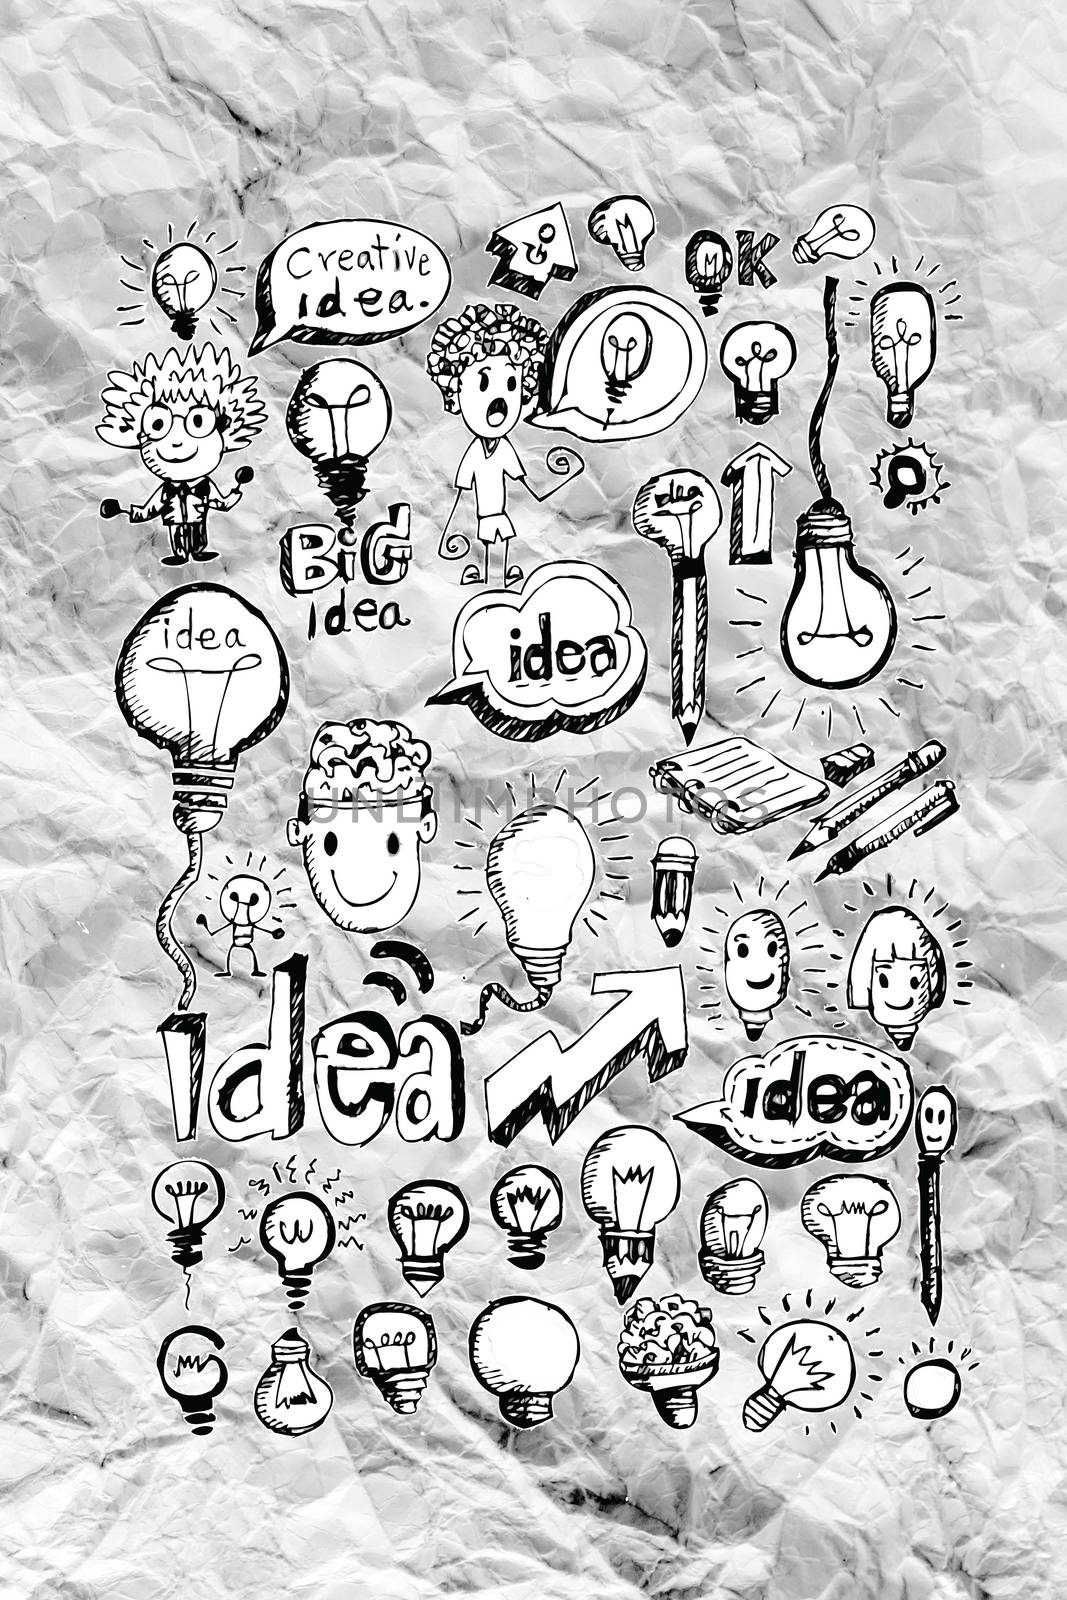 Hand doodle Business icon set idea design on crumpled paper